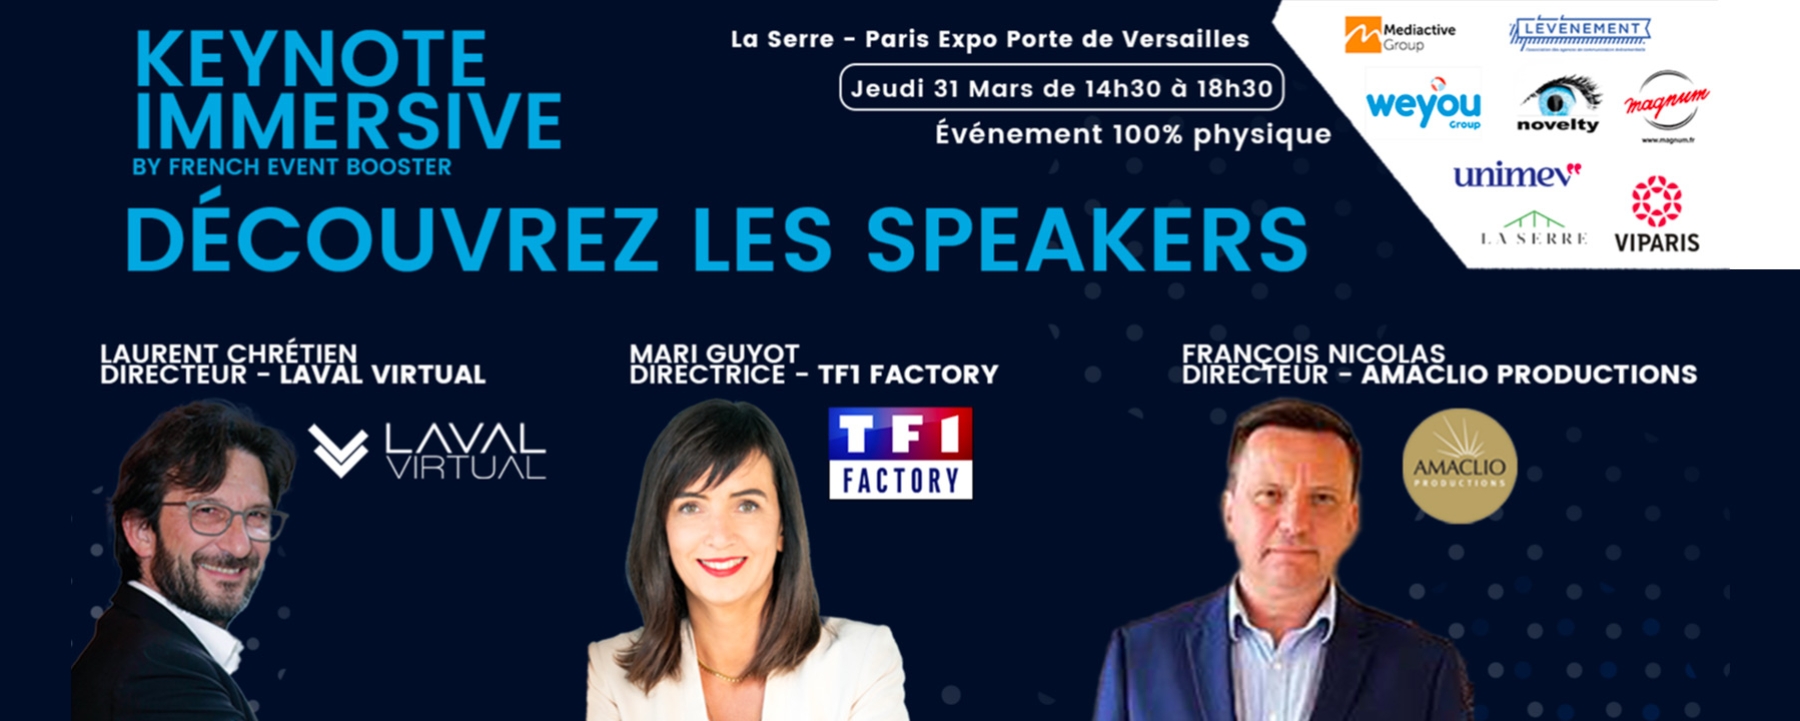 Keynote Immersive by French Event Booster